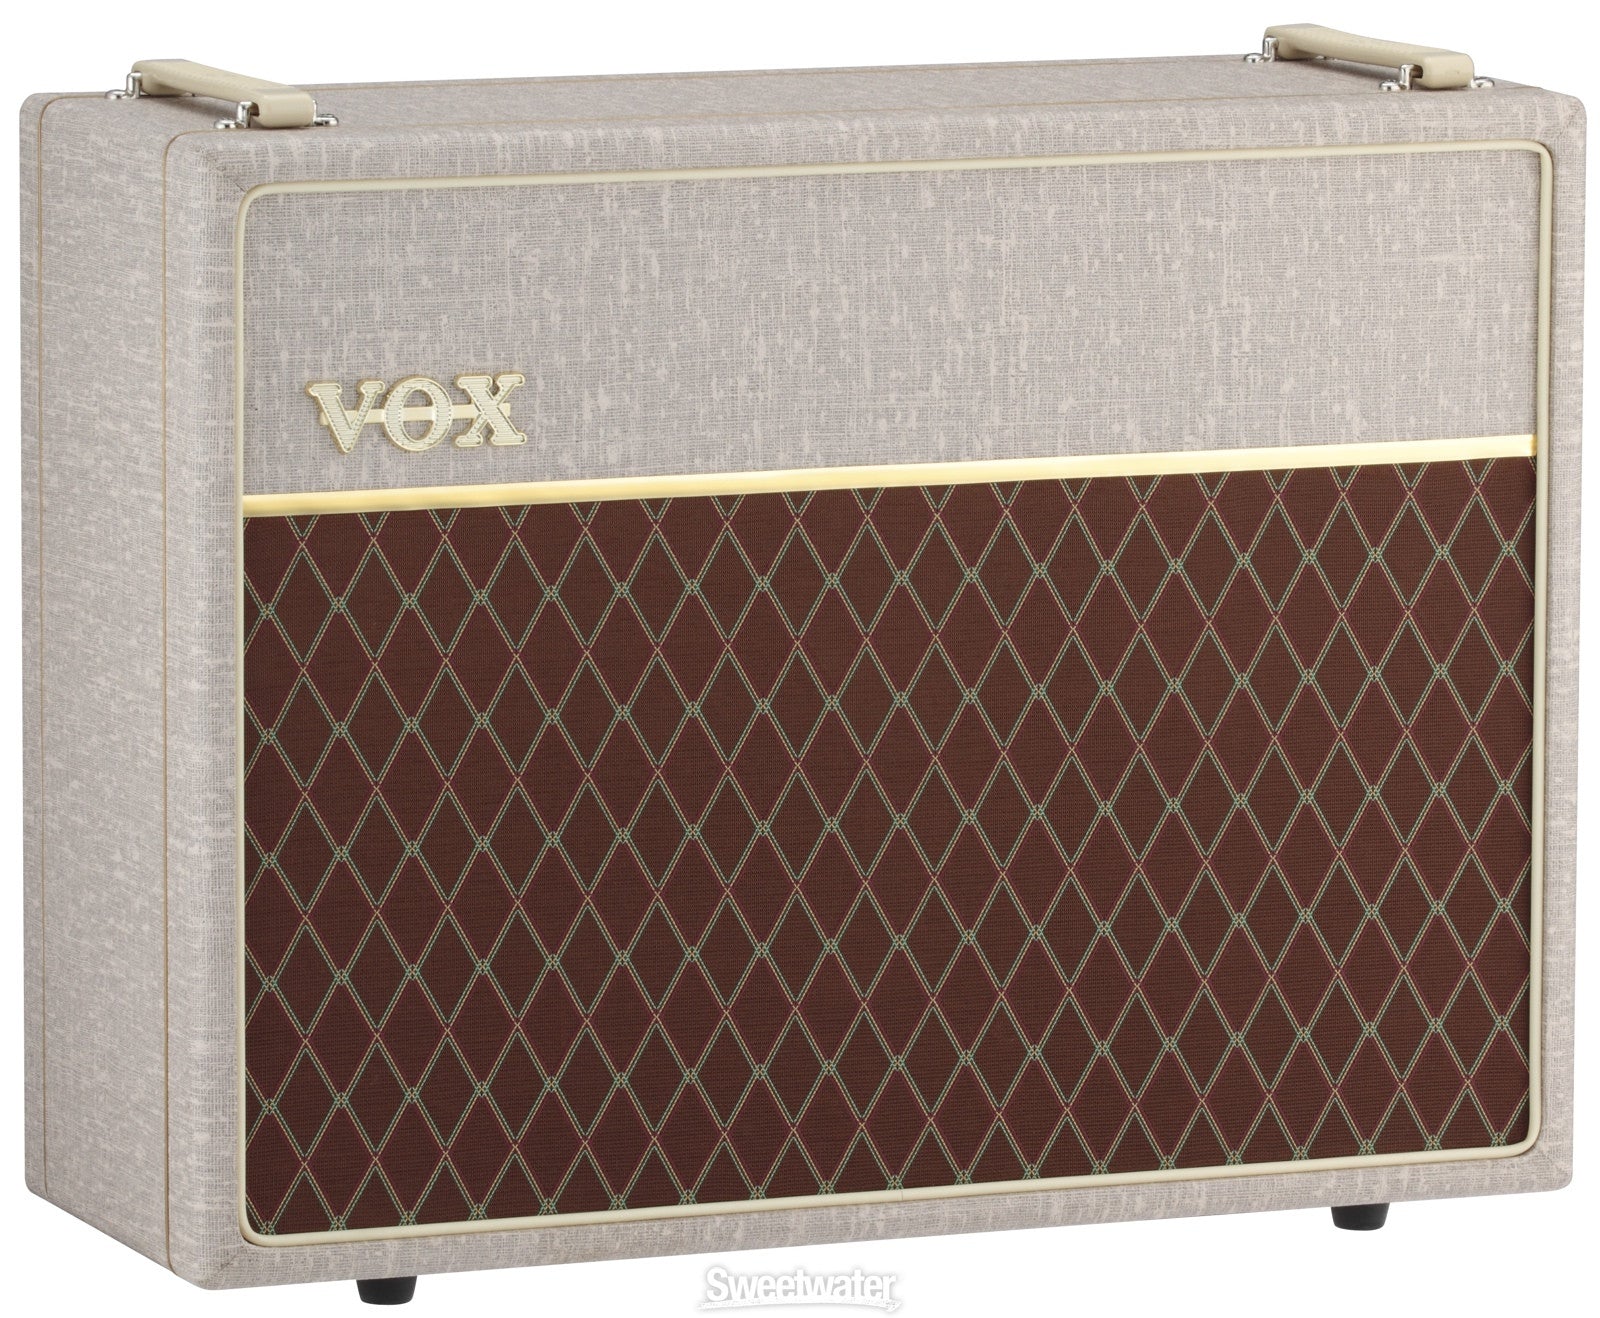 V212x Handwired 2x12" Cabinet with Celestion Blue Alnicos